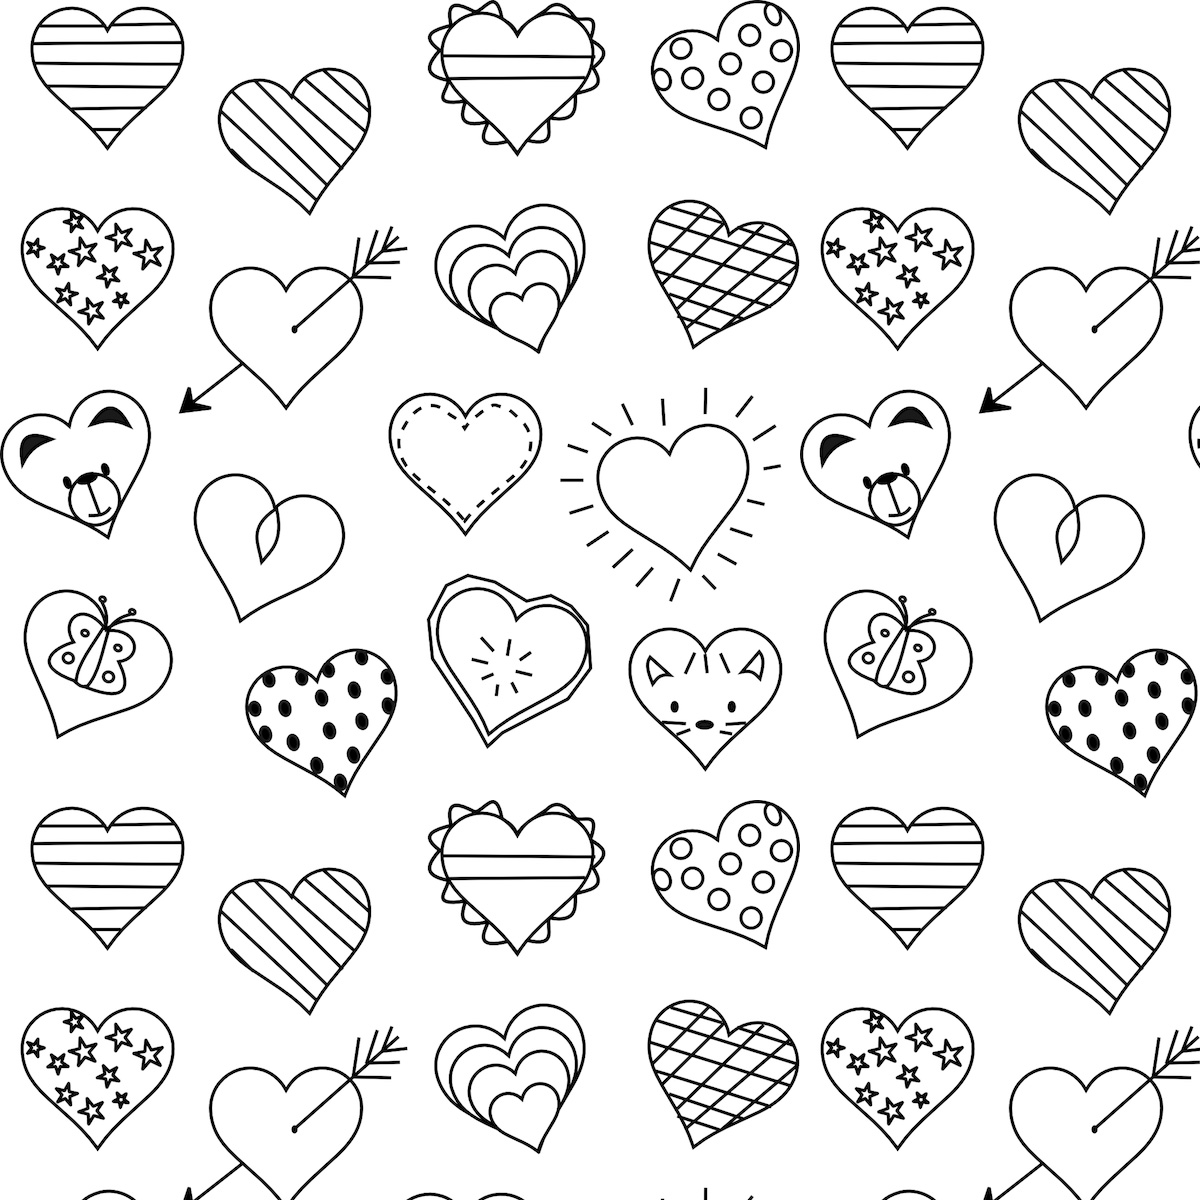 Free printable heart coloring page - ausdruckbare ...